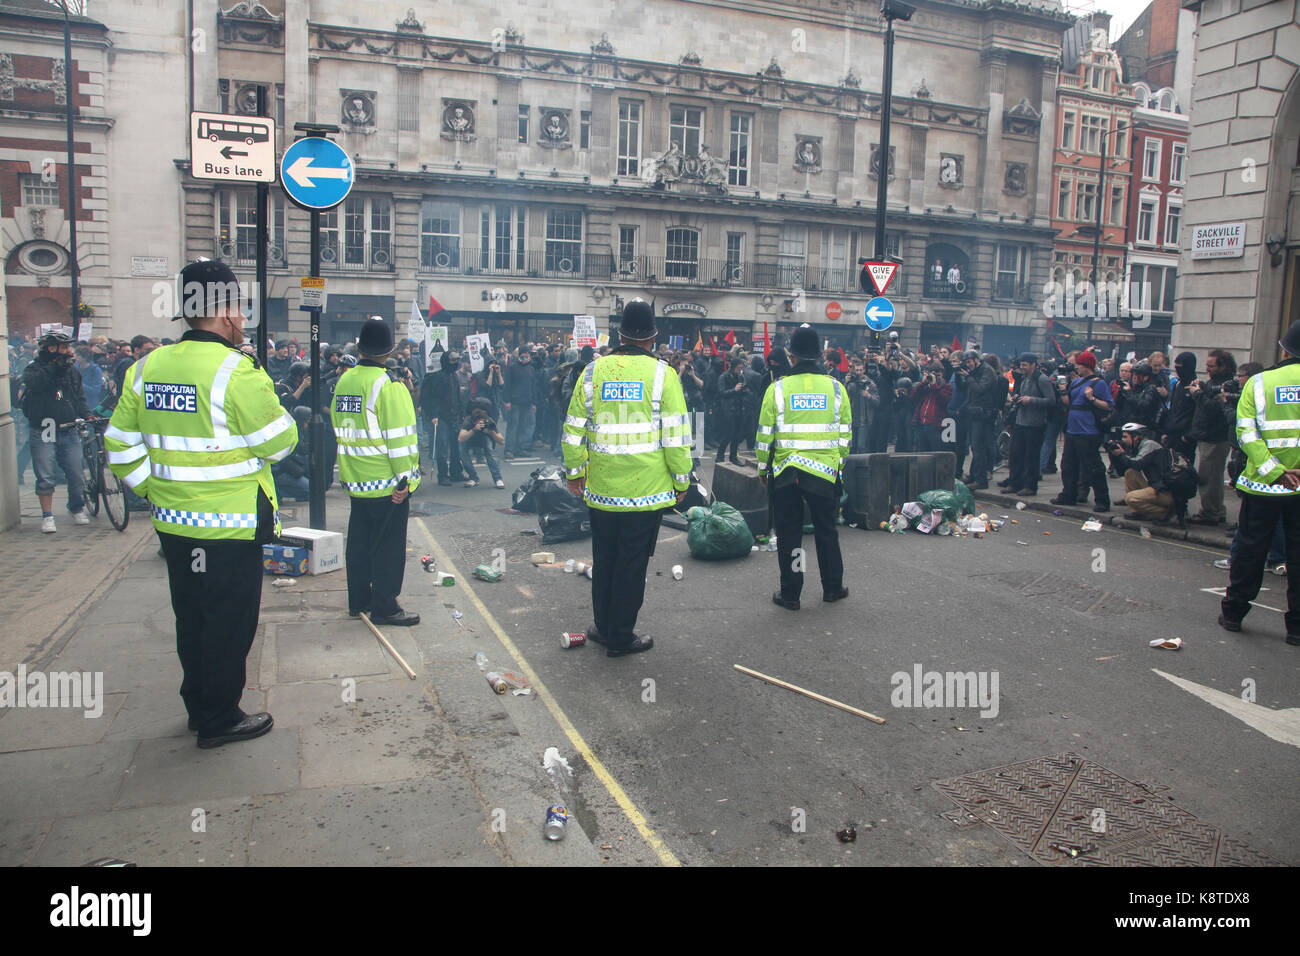 Metropolitan police and the public during an anti-austerity march. Stock Photo